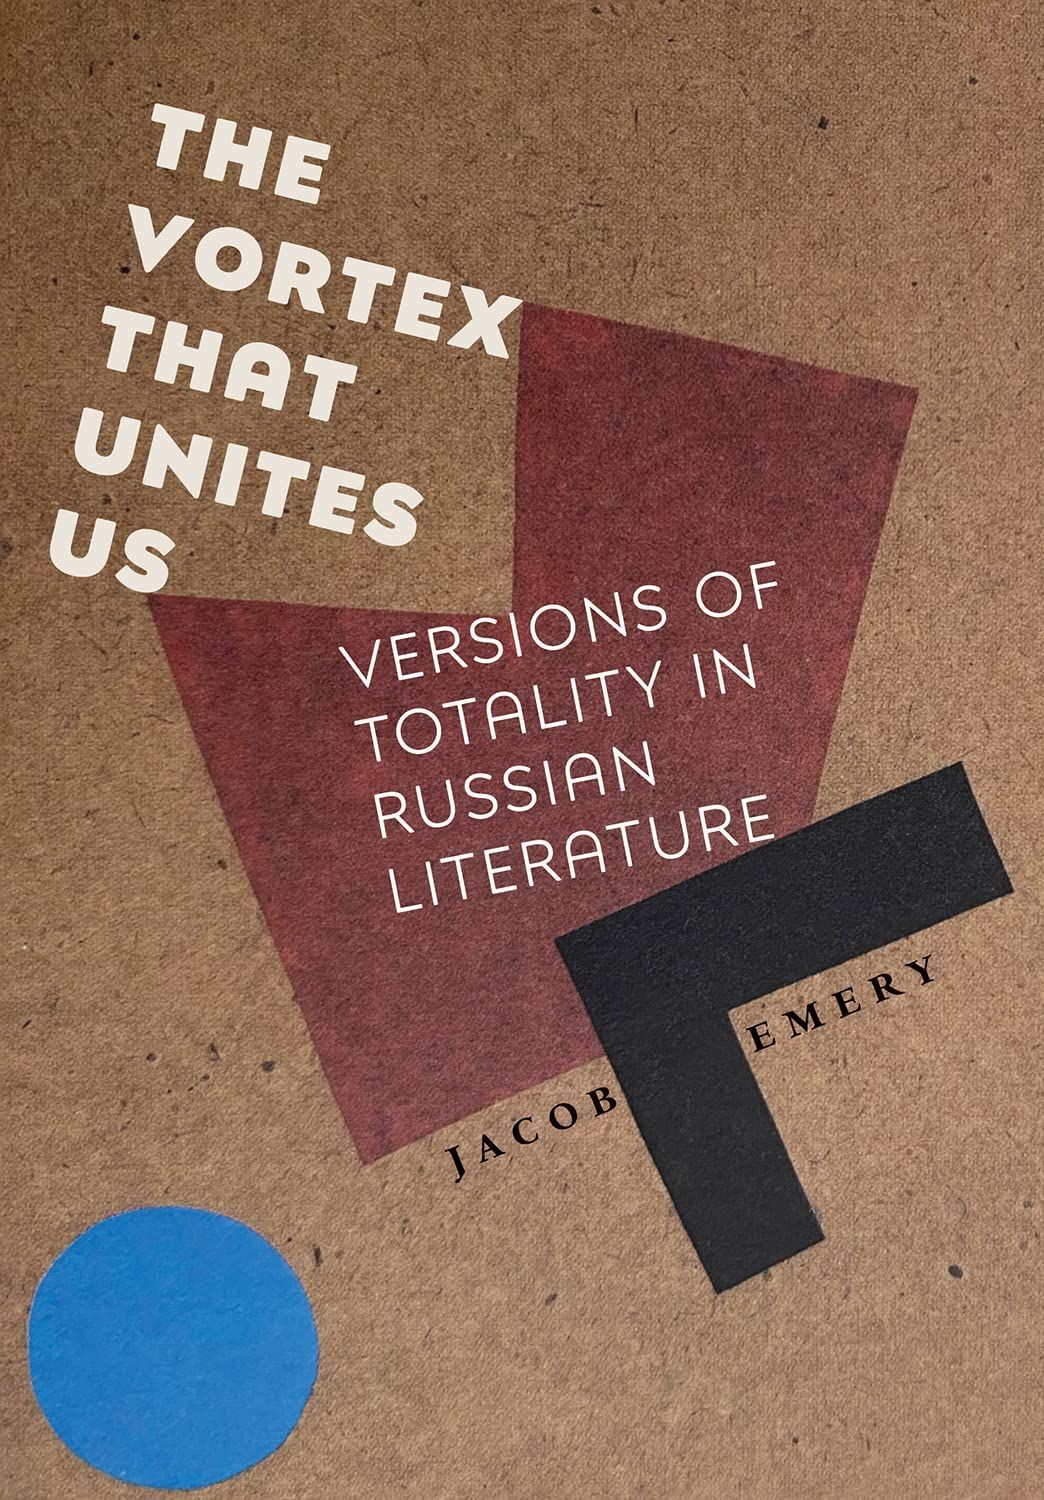 Hunger for the Whole: On Jacob Emery’s “The Vortex That Unites Us”